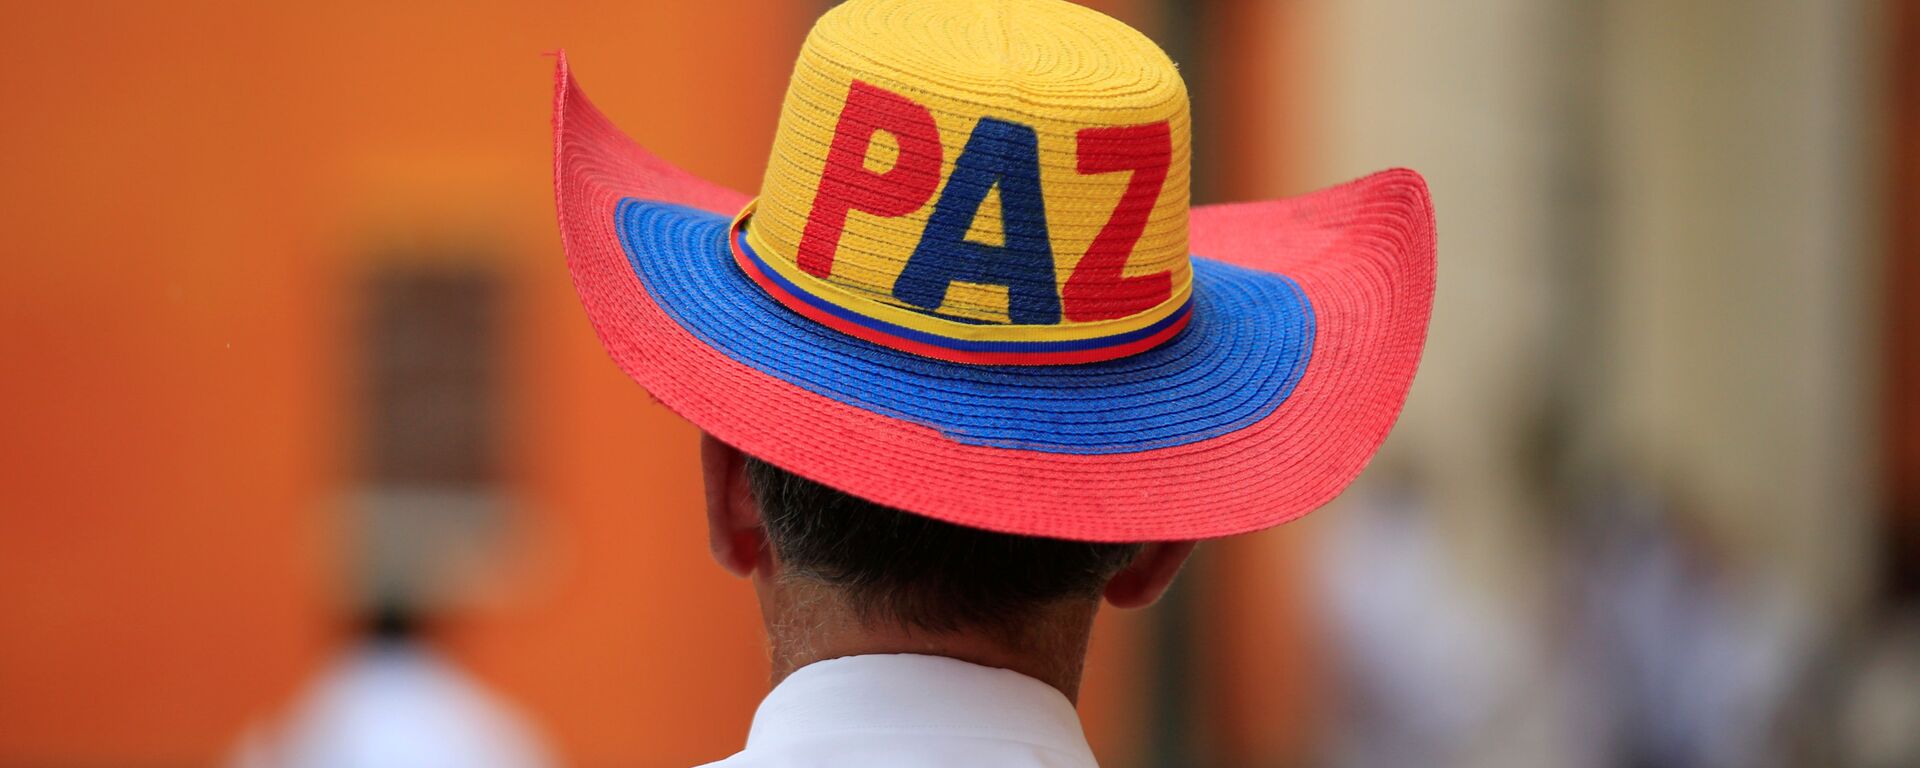 A man walks on a street wearing a hat with the writing Peace in Cartagena, Colombia, September 26, 2016. - Sputnik Mundo, 1920, 25.11.2021